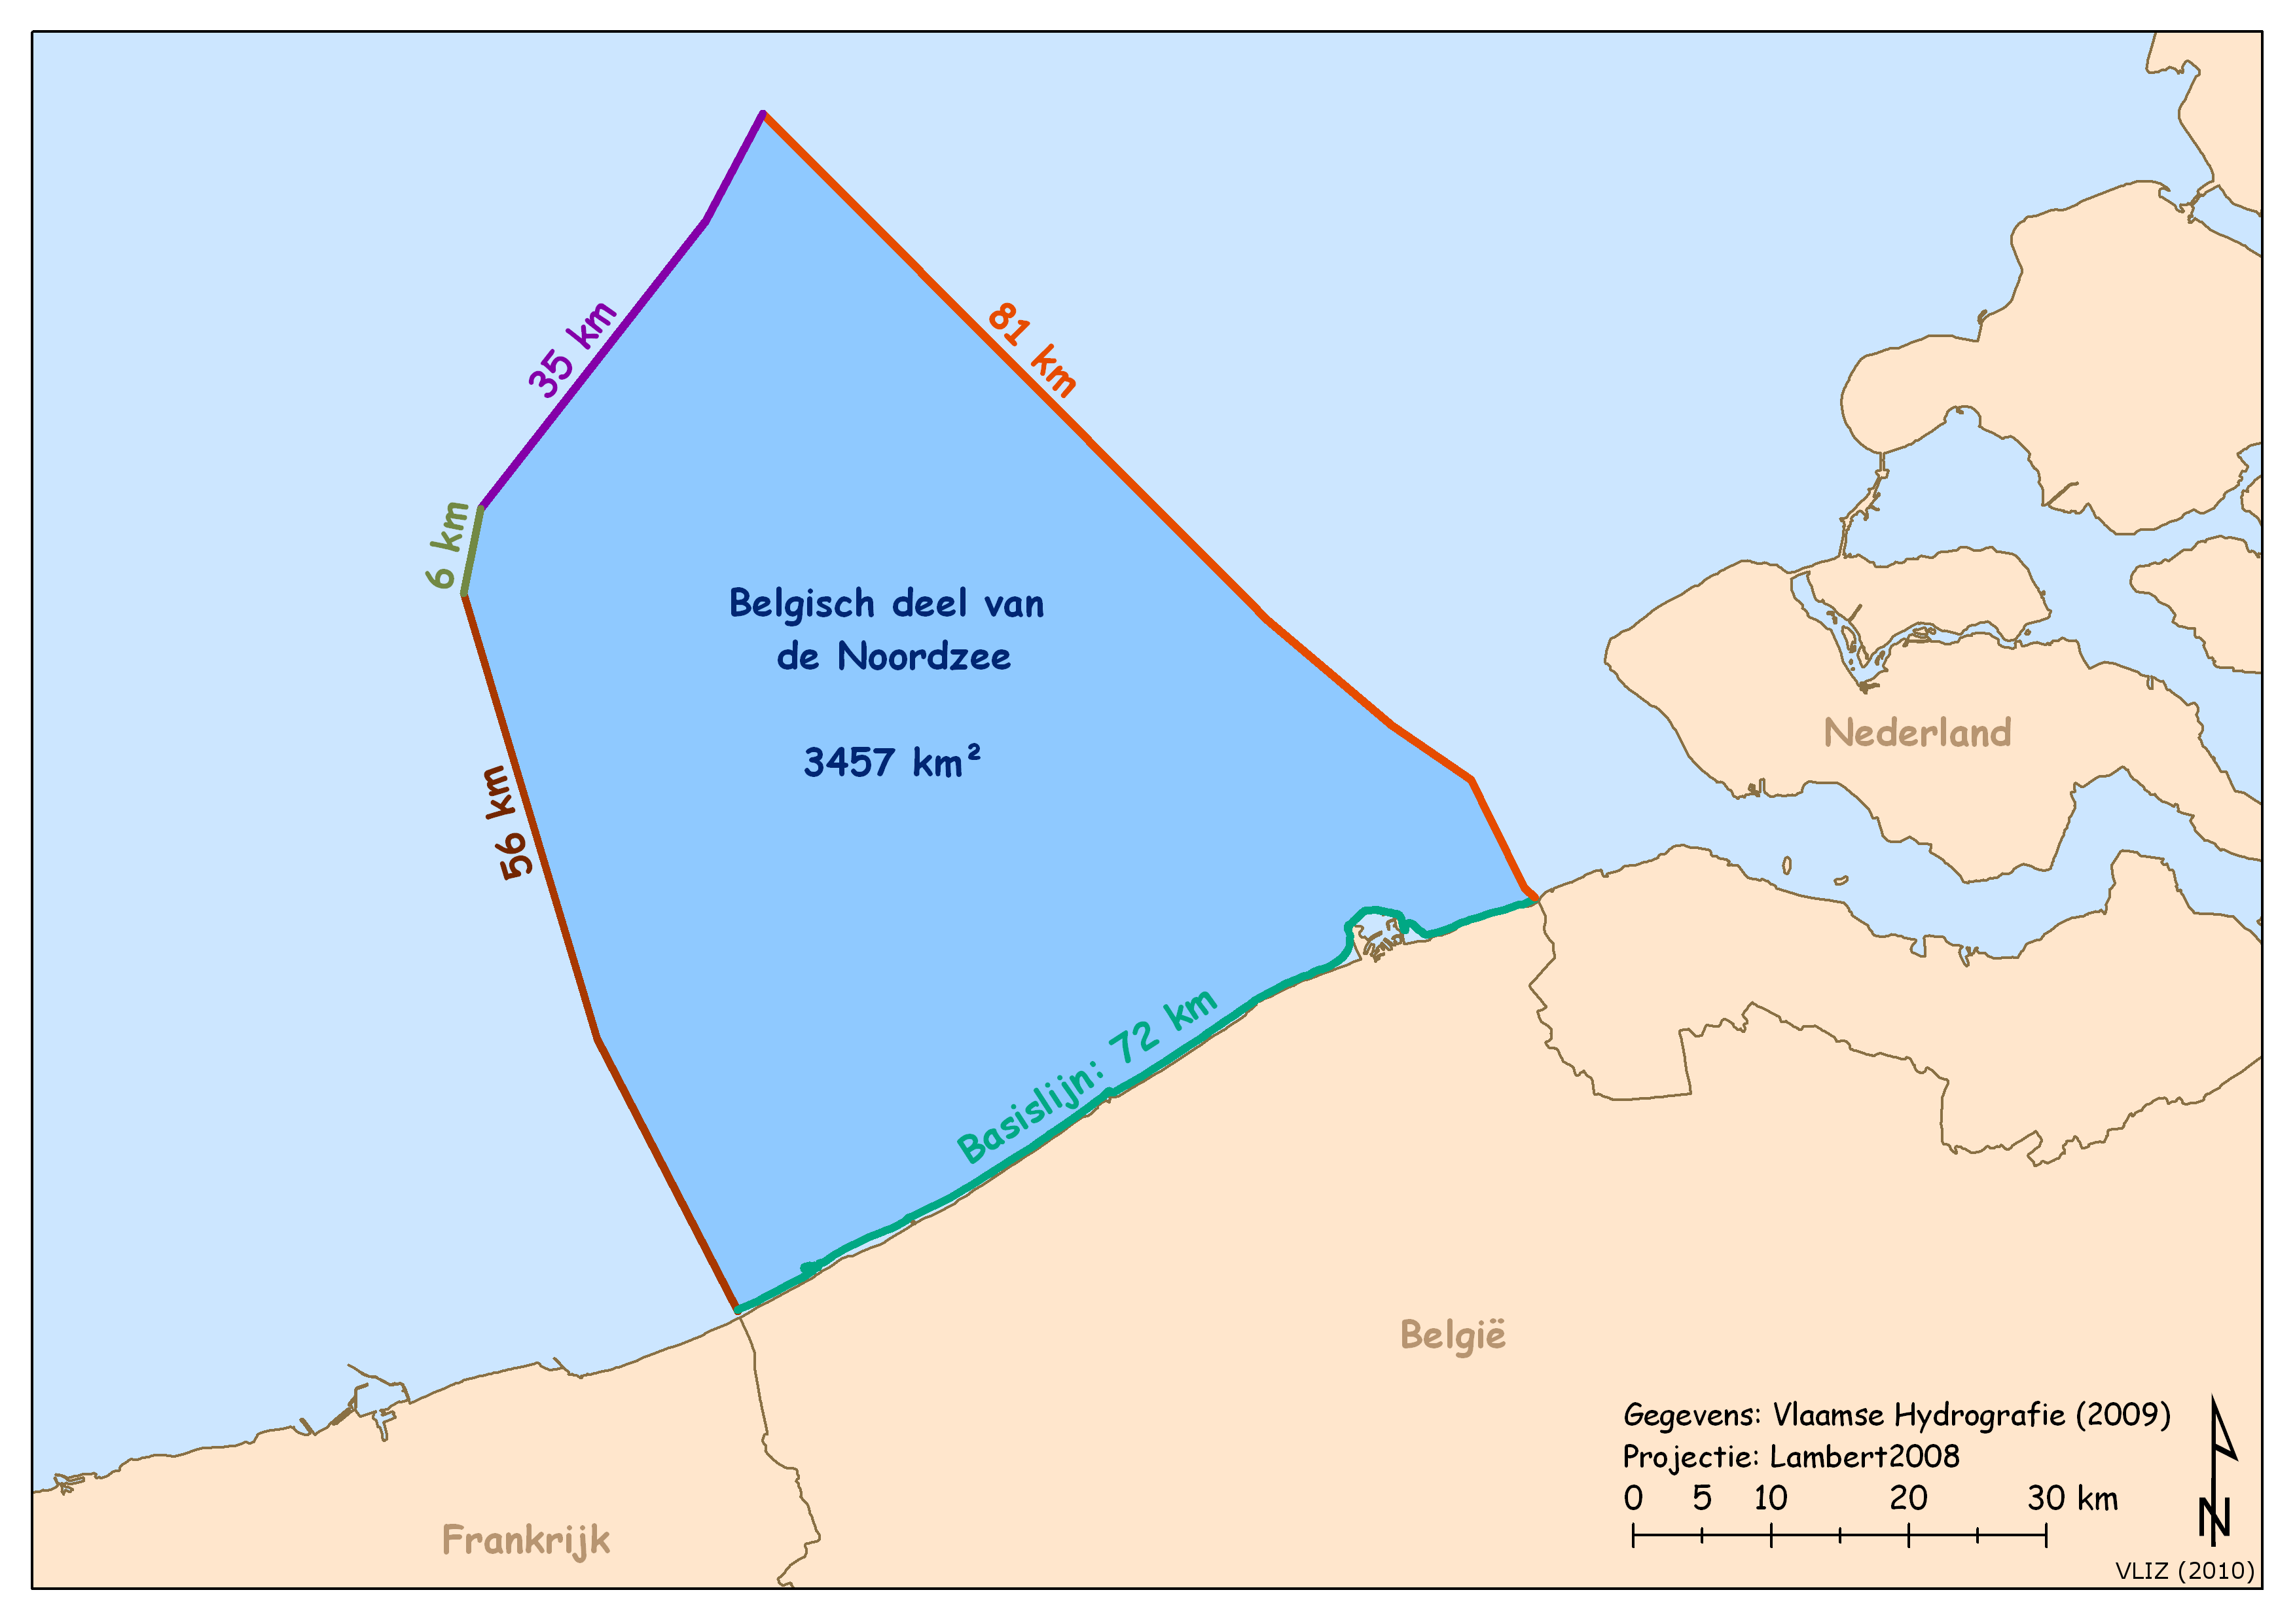 Belgium claims for outer limit lines of the continental shelf and territorial sea